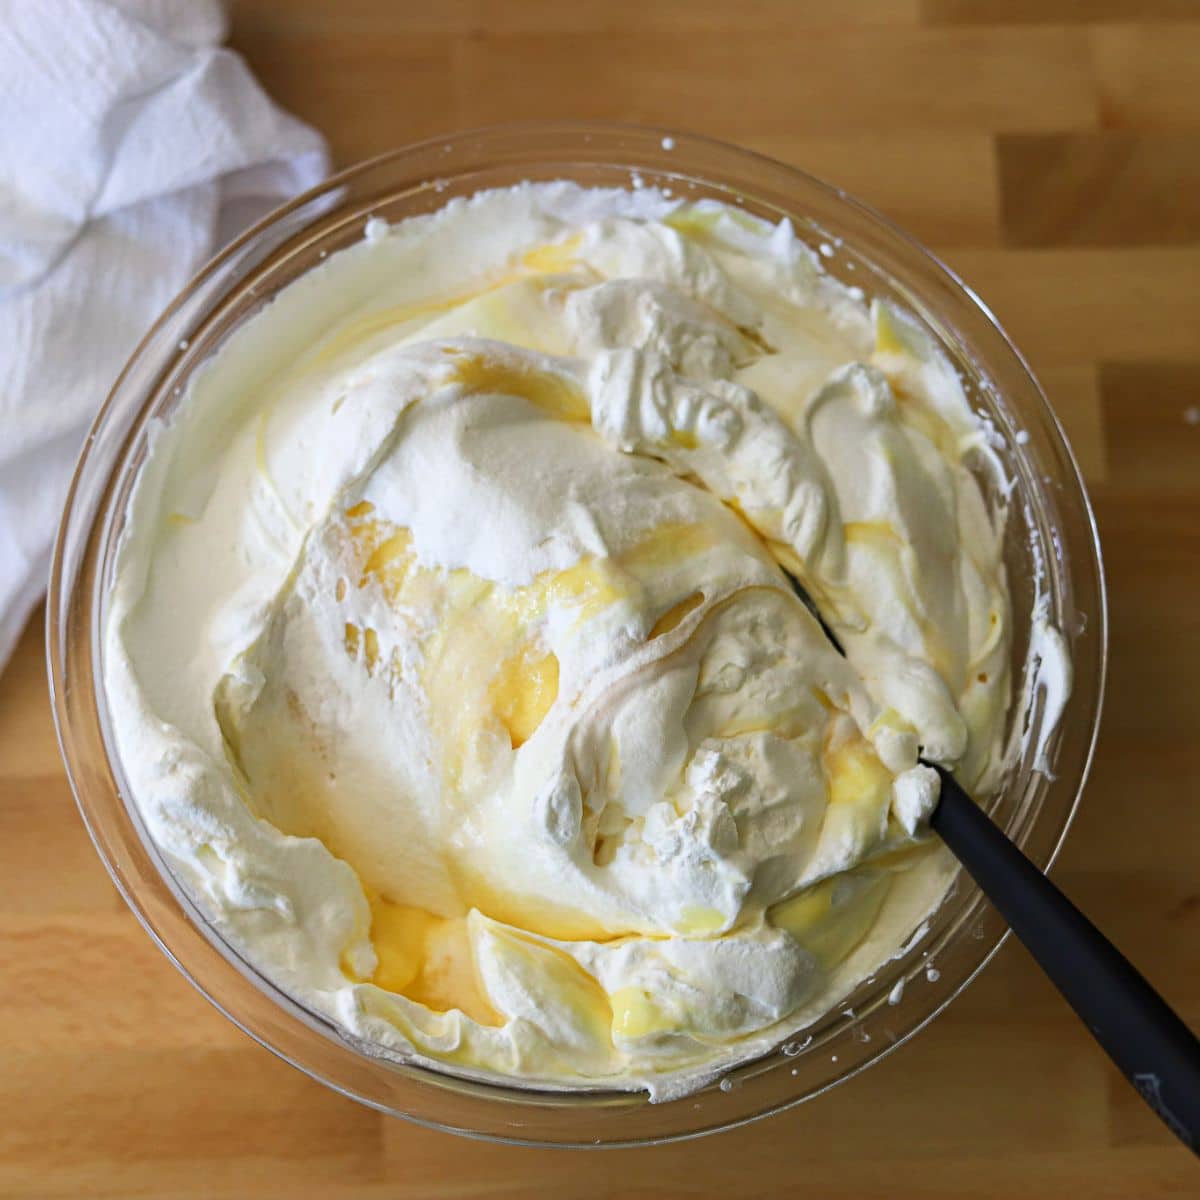 Cool whip being folded into vanilla pudding in a large glass mixing bowl.